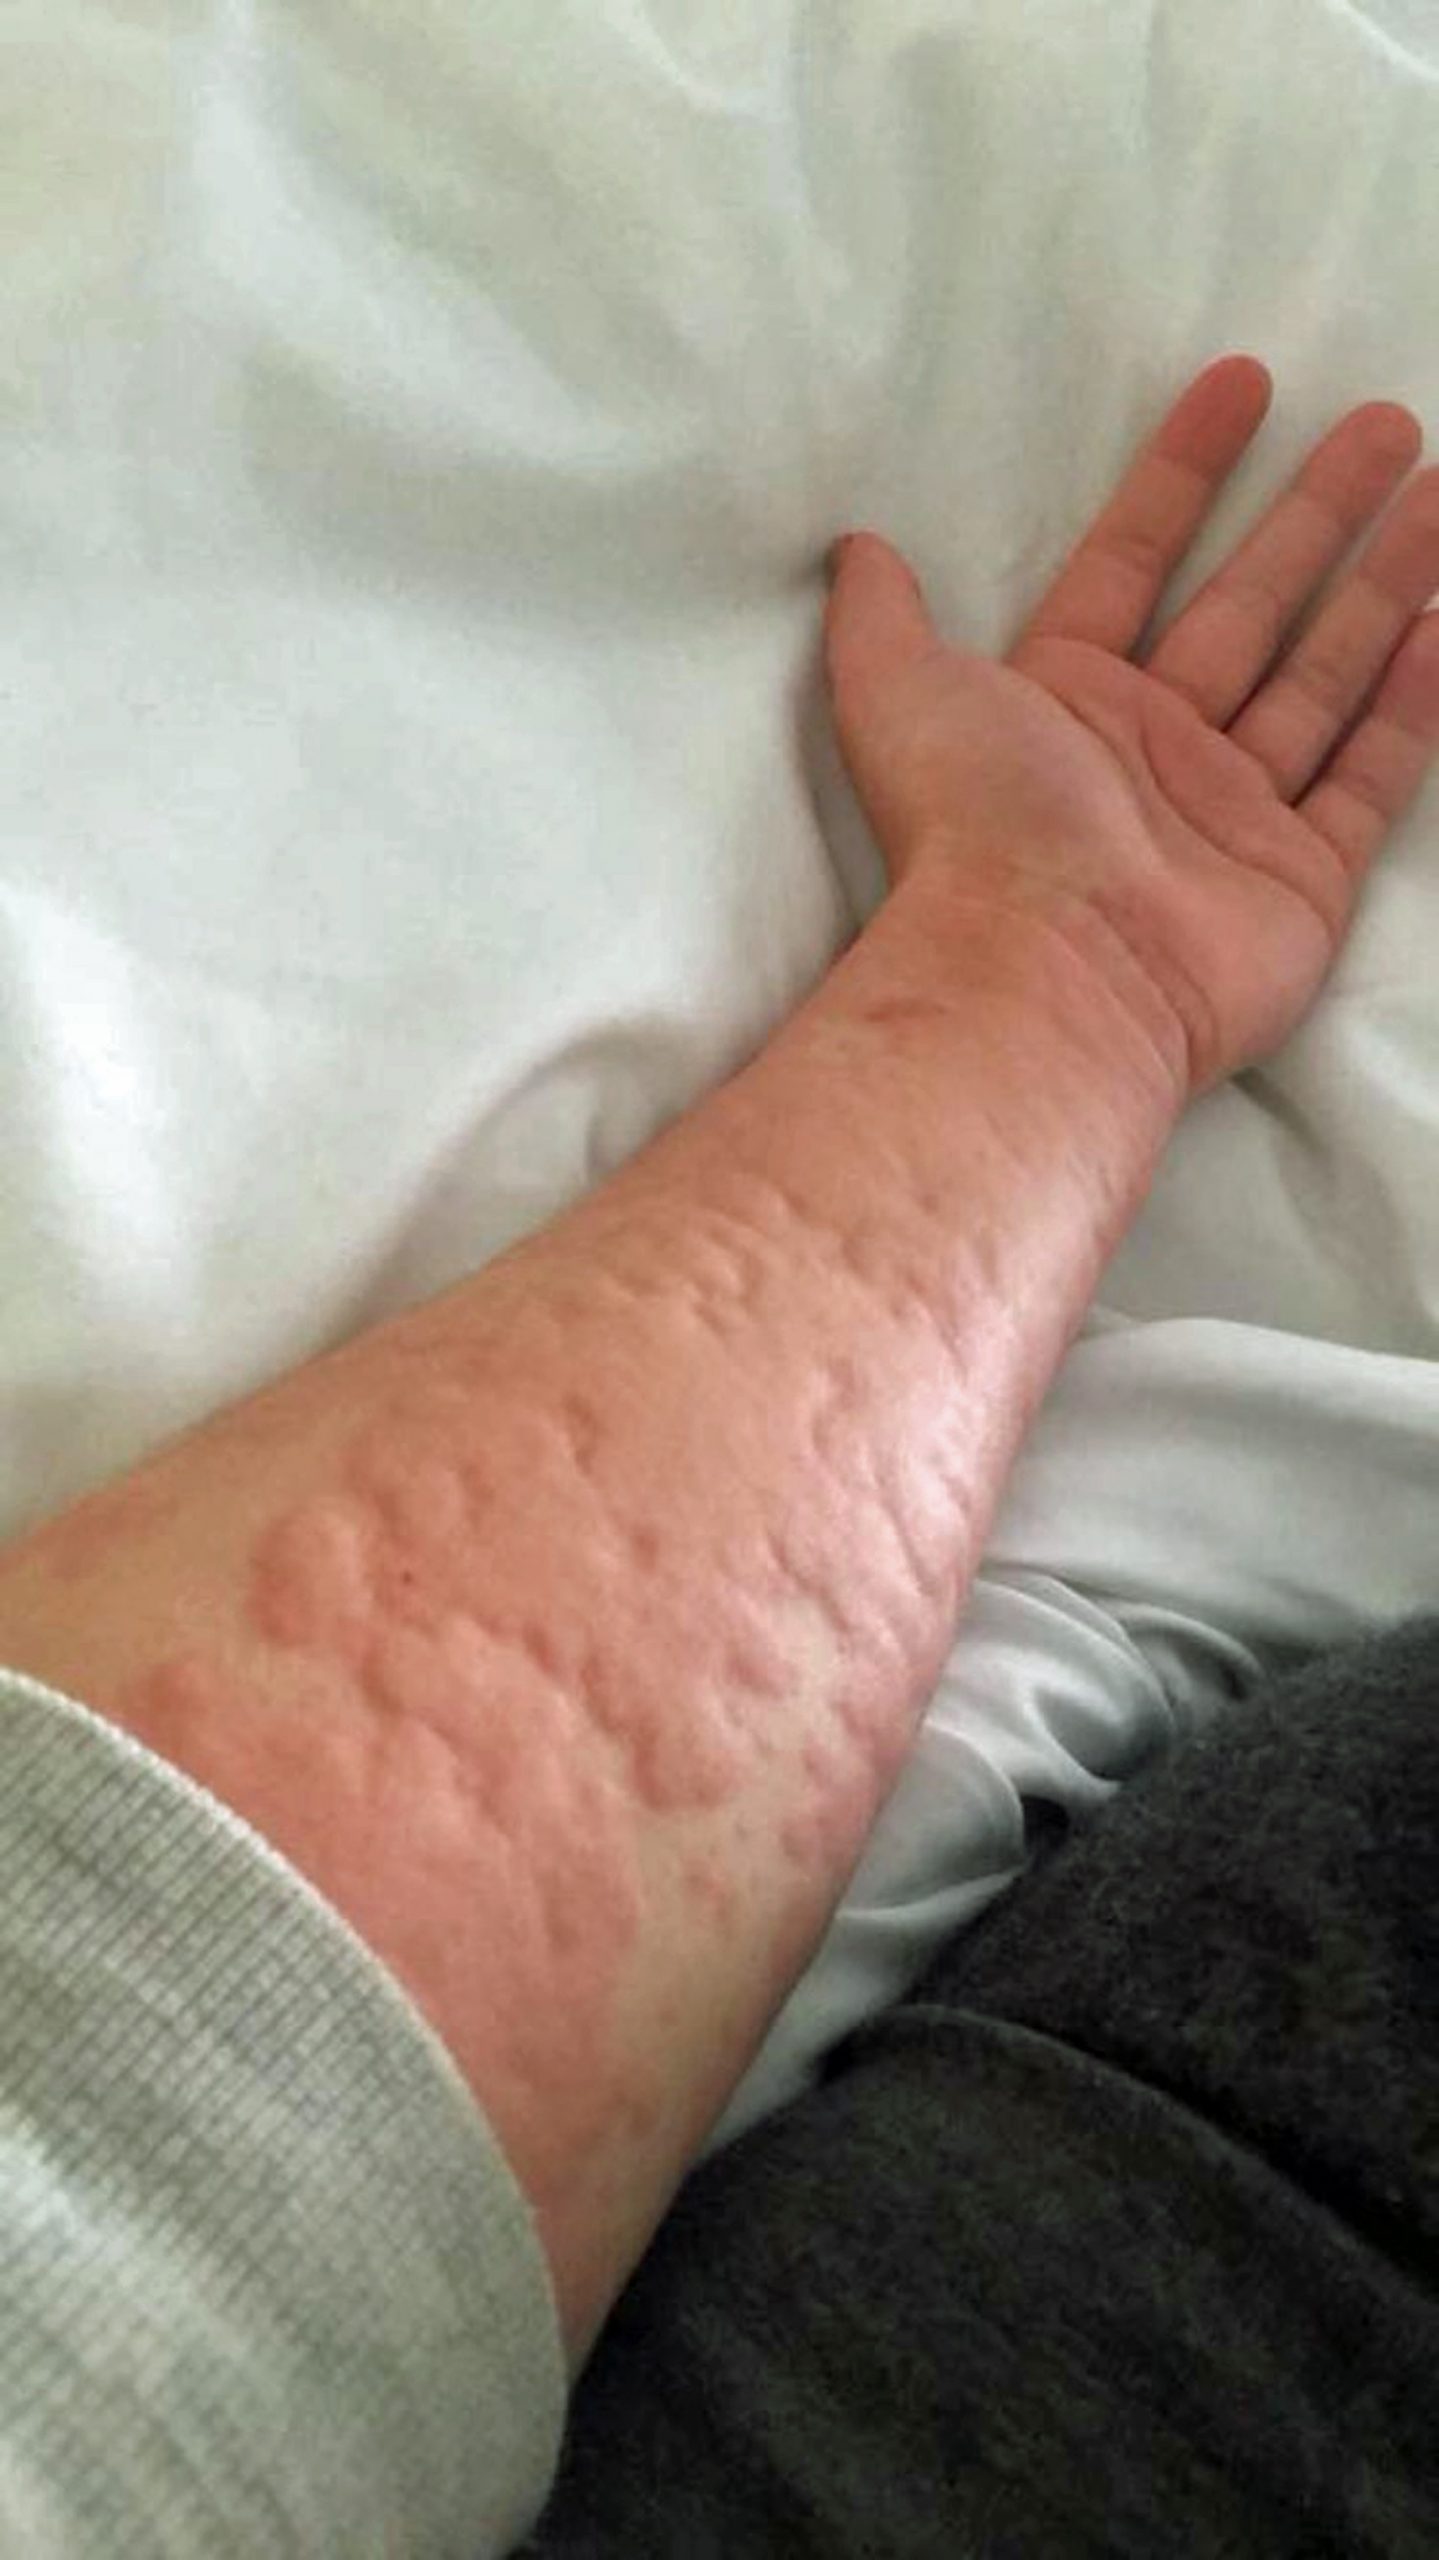 » Woman with winter allergy speaks out on condition after going viral